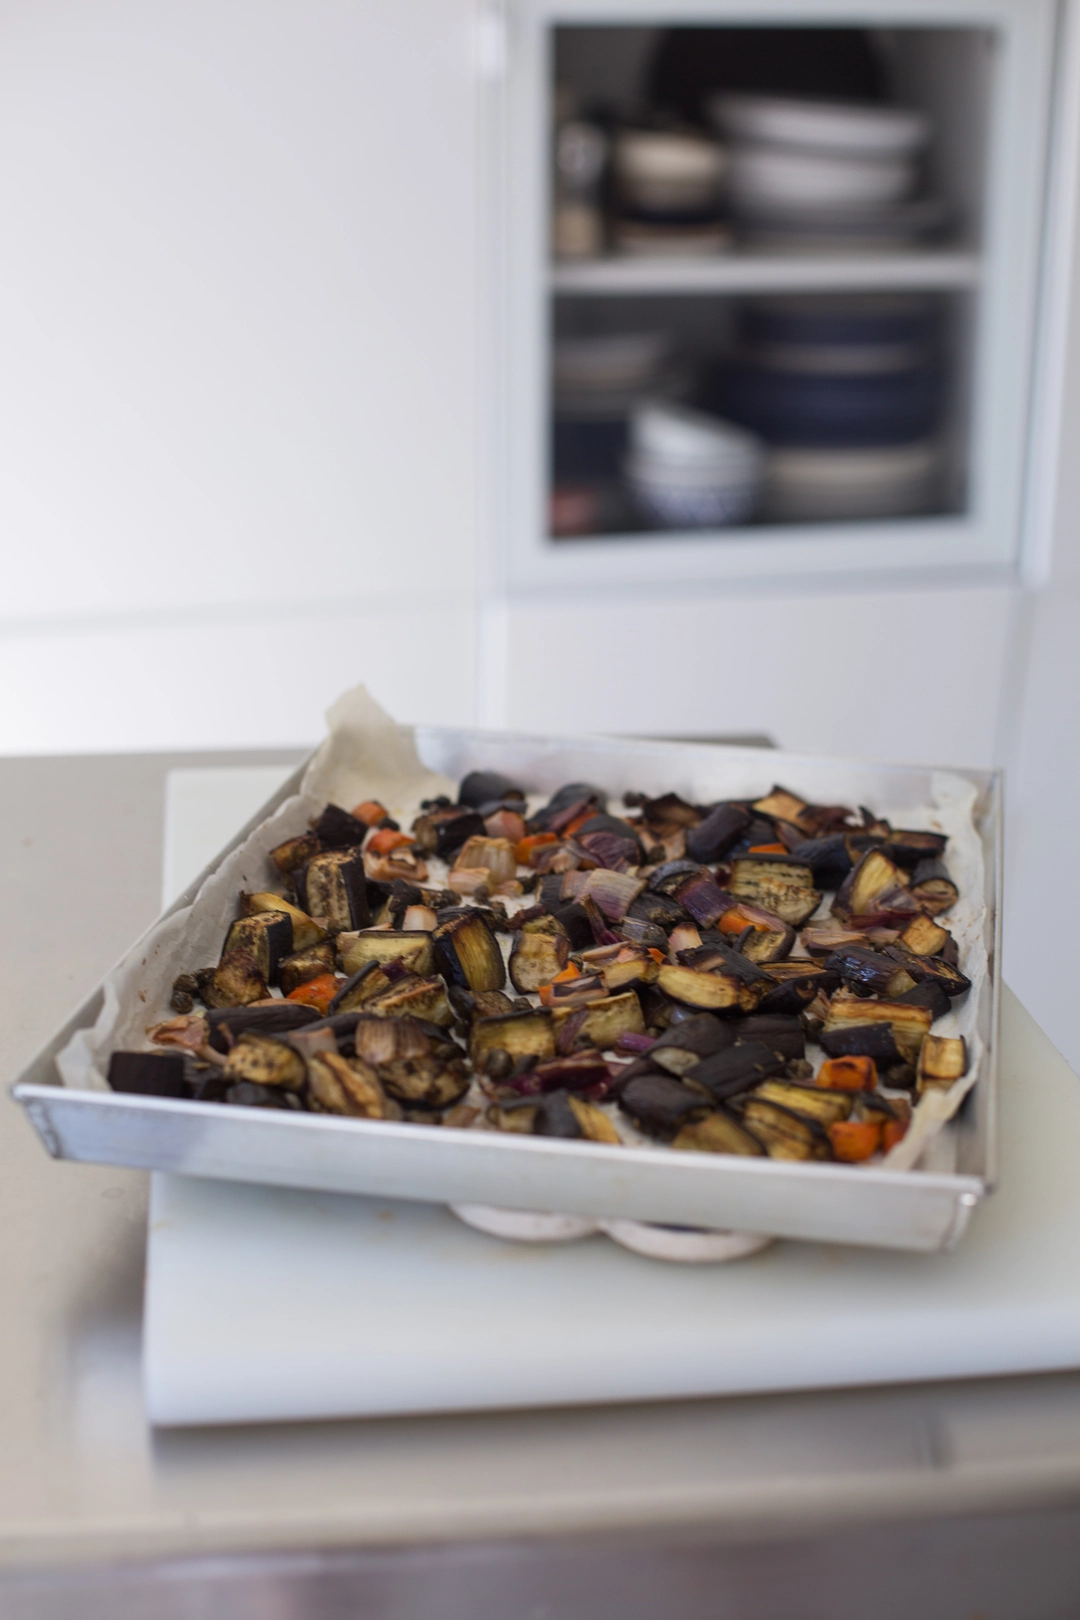 Recipe: Sicilian style baked vegetables - 1